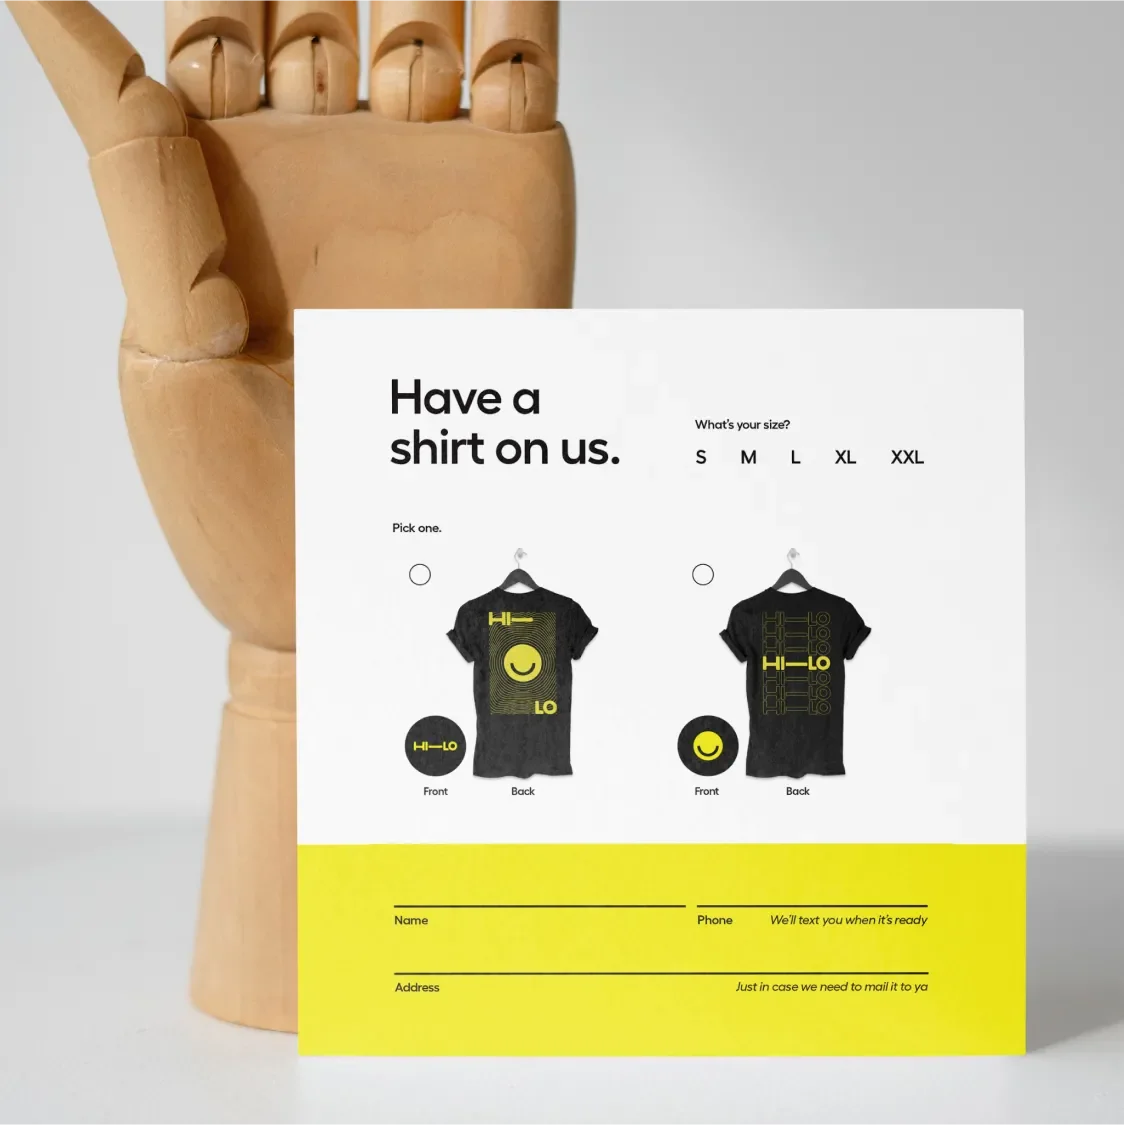 Print t-shirt order form from the Hi-Lo open house propped against a wooden hand